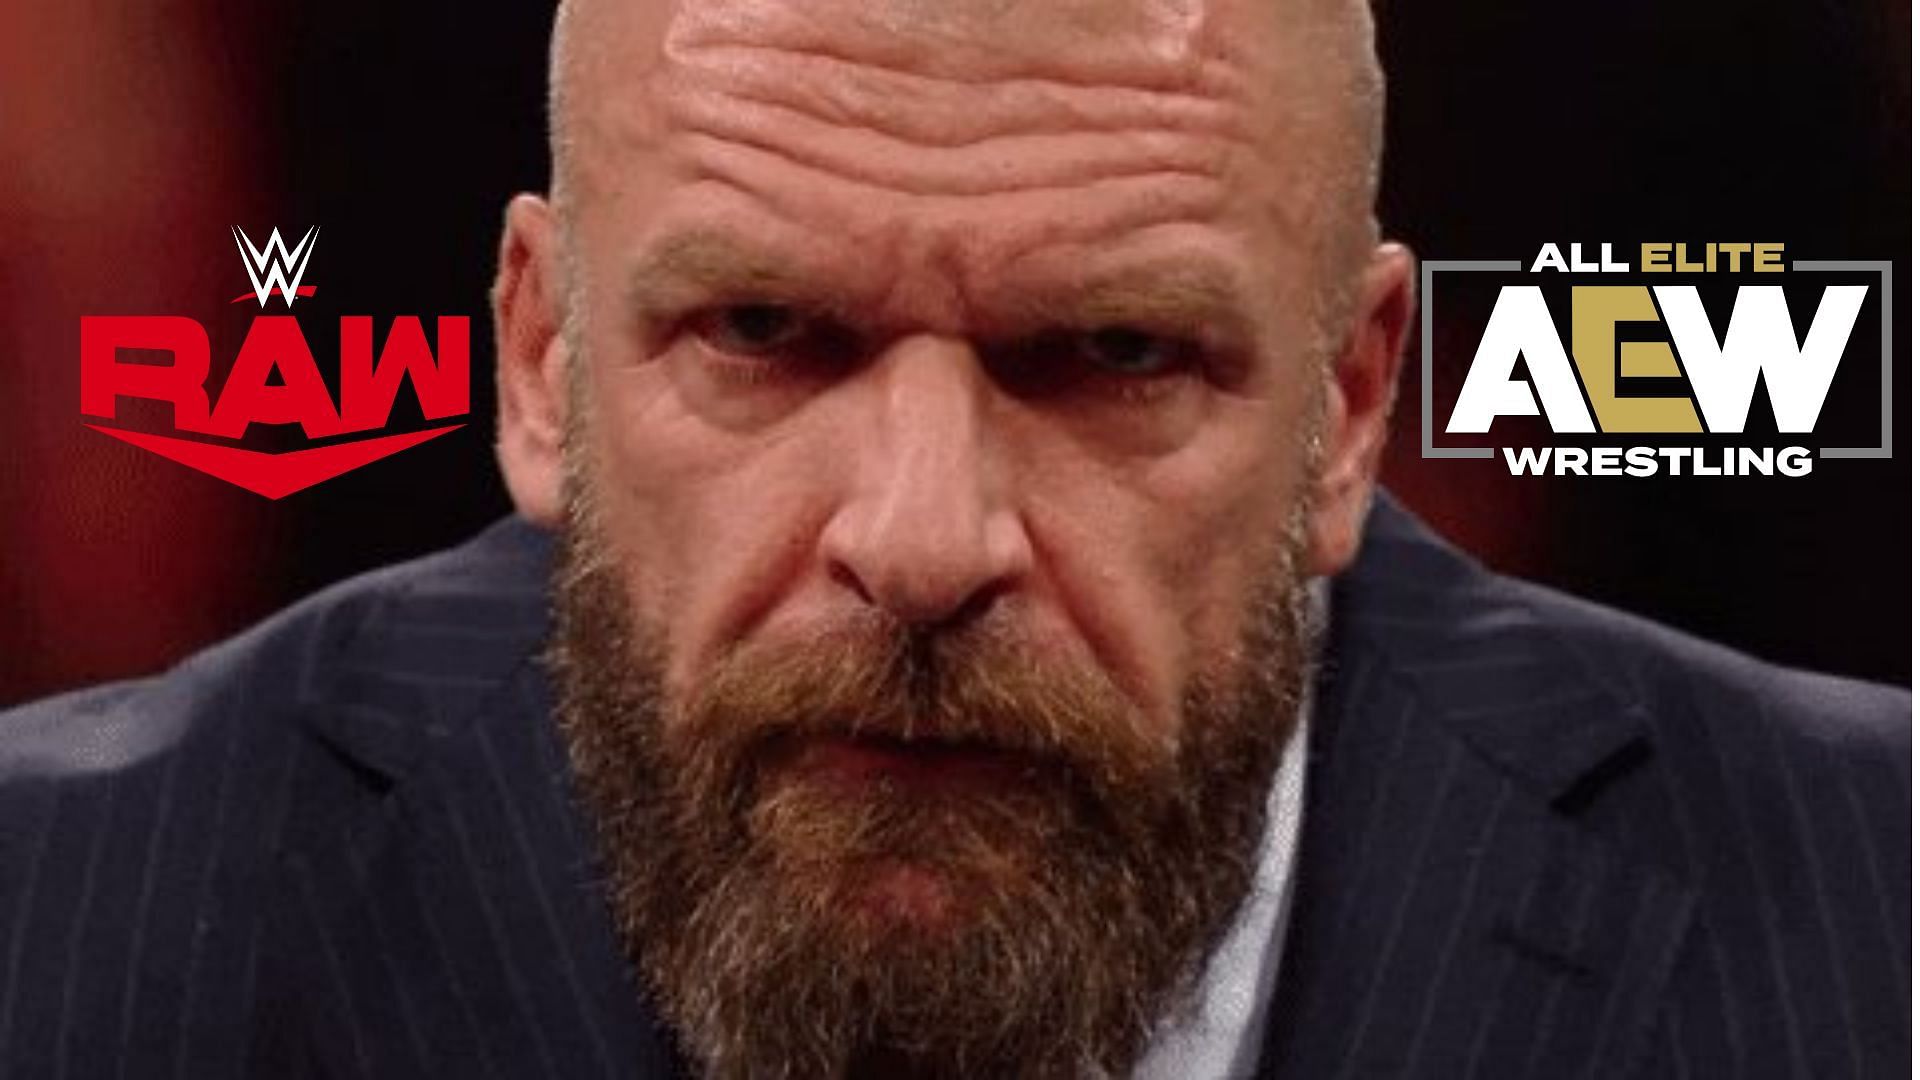 Triple H tried to counter AEW